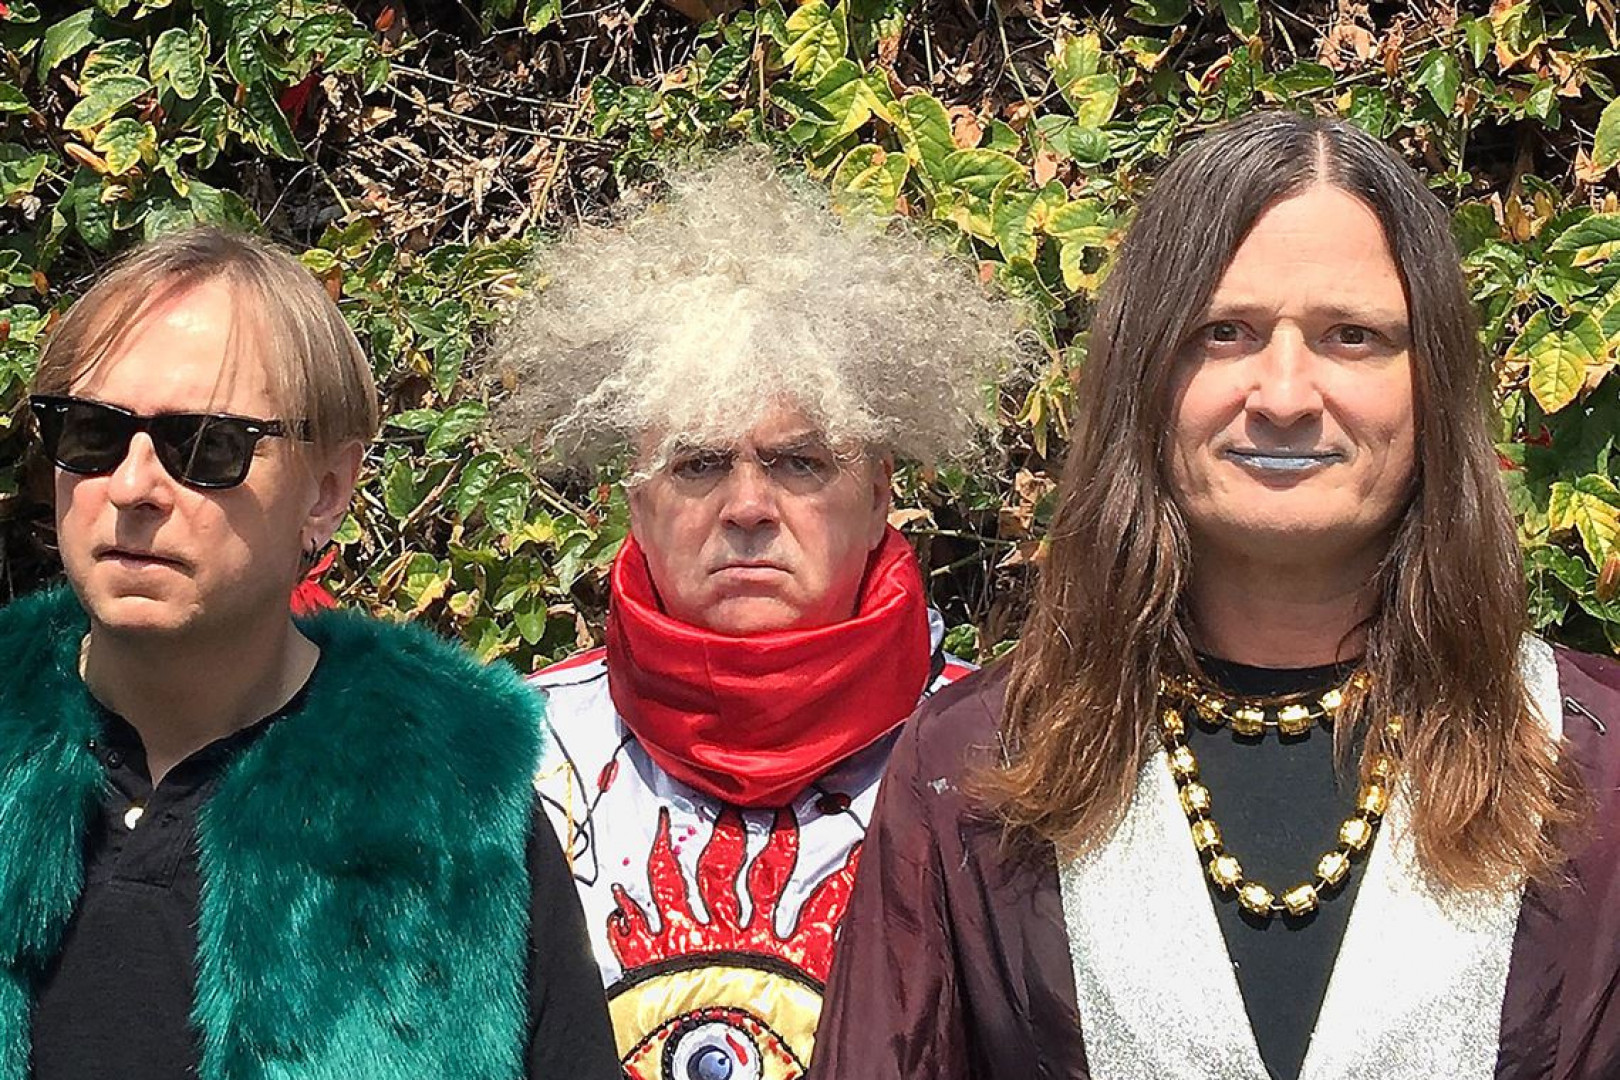 The Melvins announce full USA tour (to start immediately after their upcoming full USA tour)